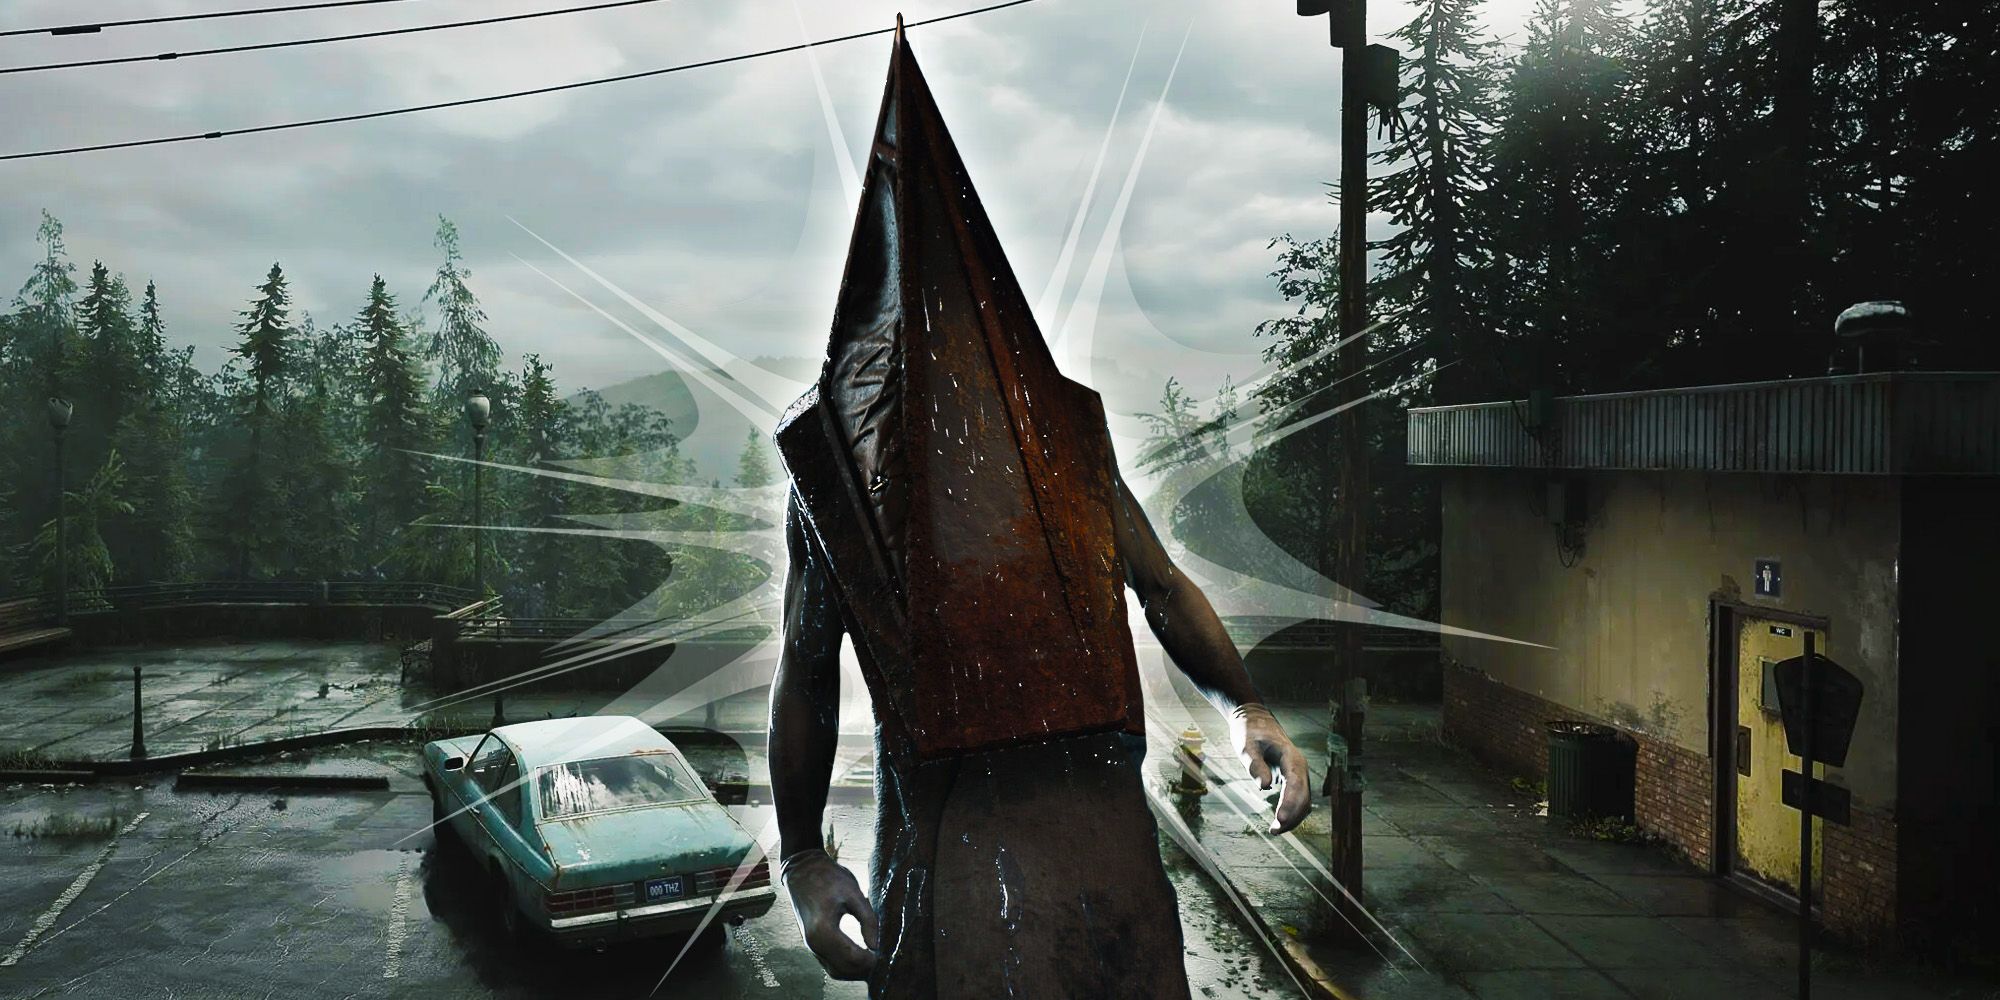 Pyramid Head in front of a background with a run-down parking lot.